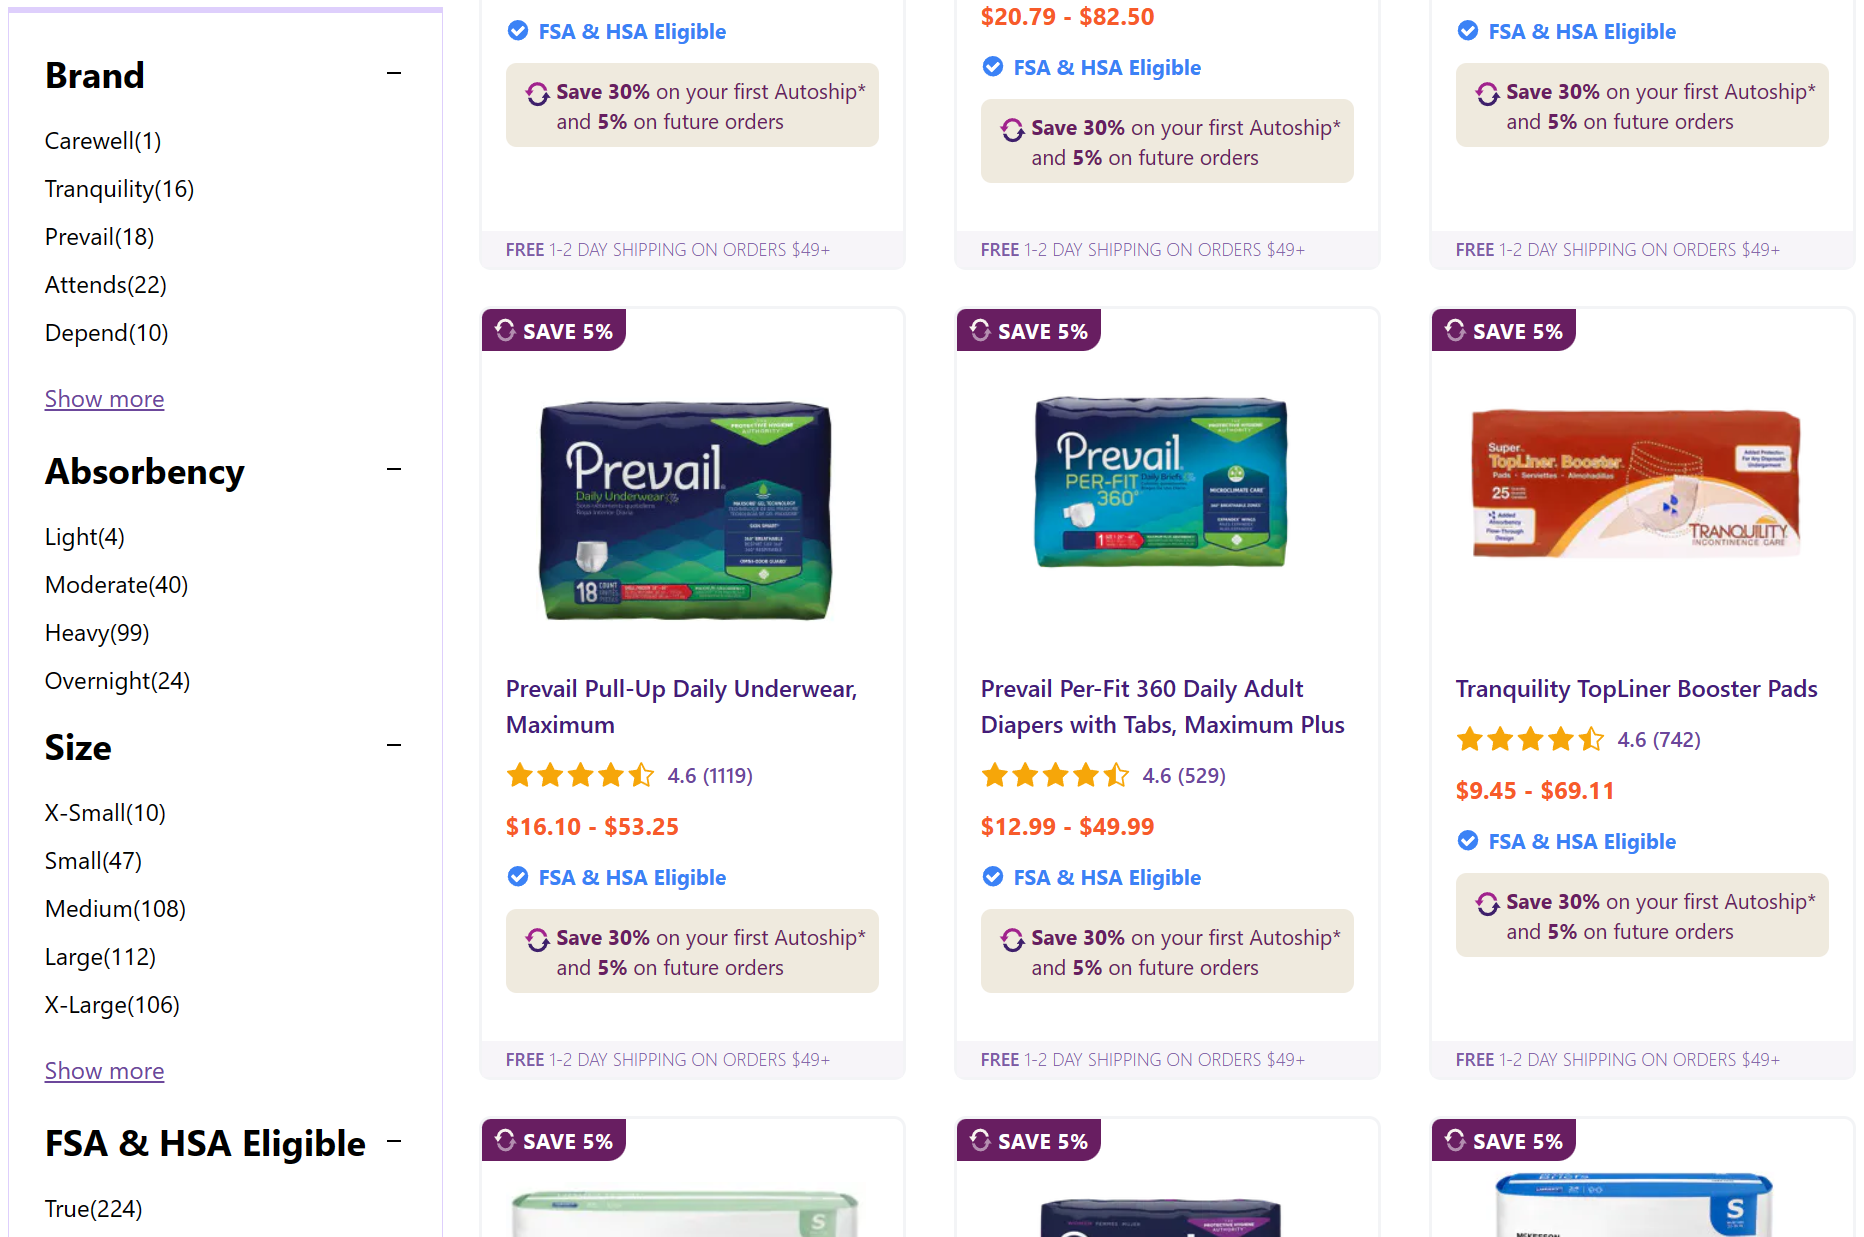 Carewell.com diapers and underwear